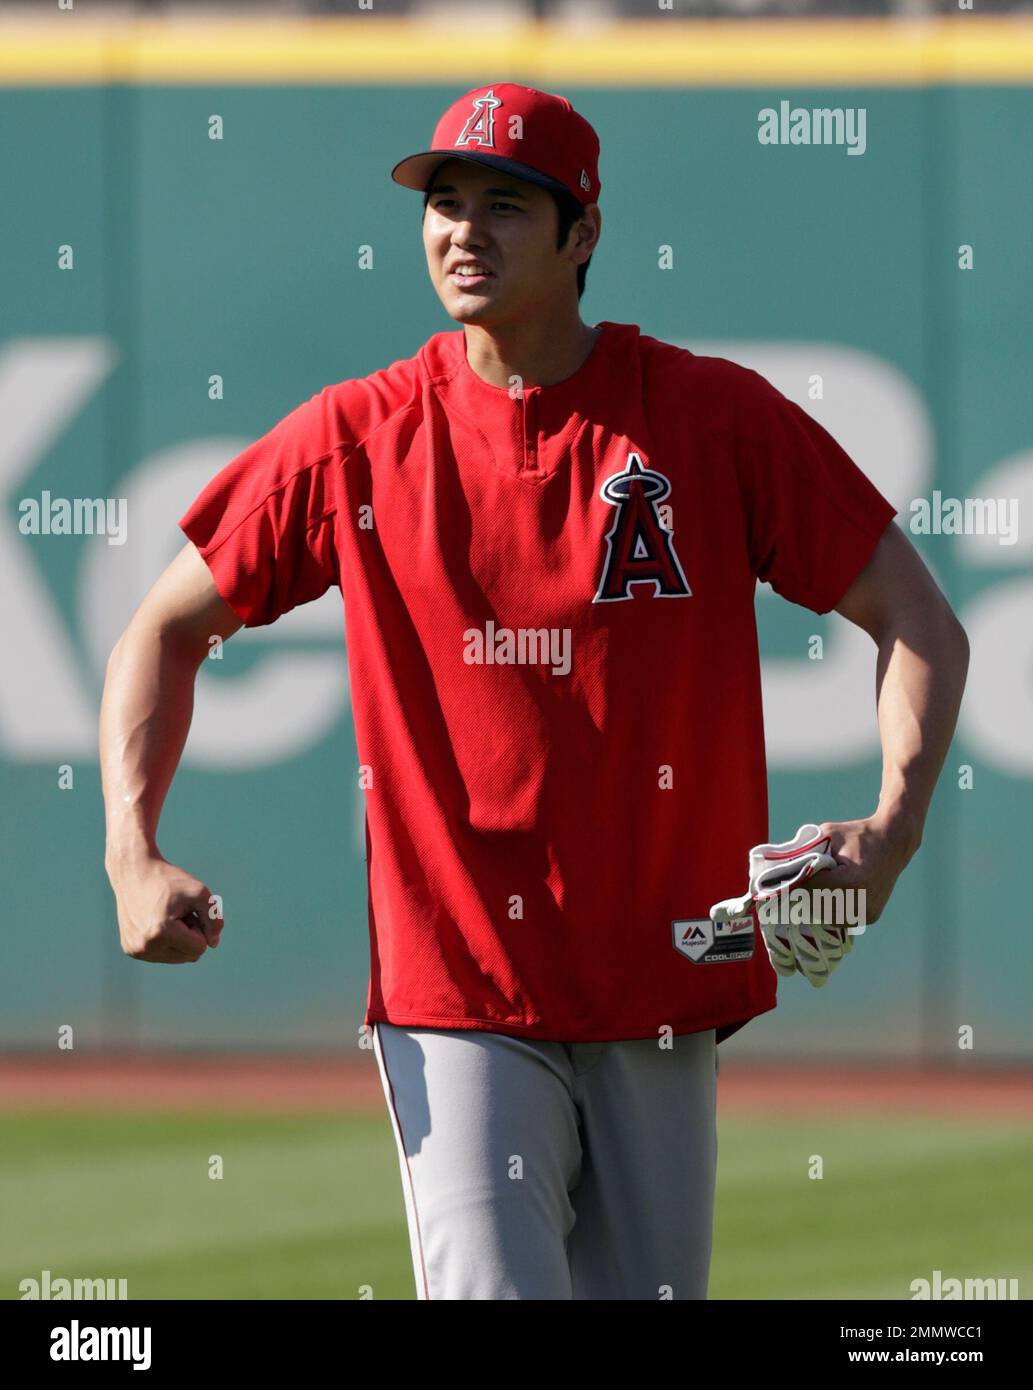 Los Angeles Angels' Shohei Ohtani flexes his muscles before a